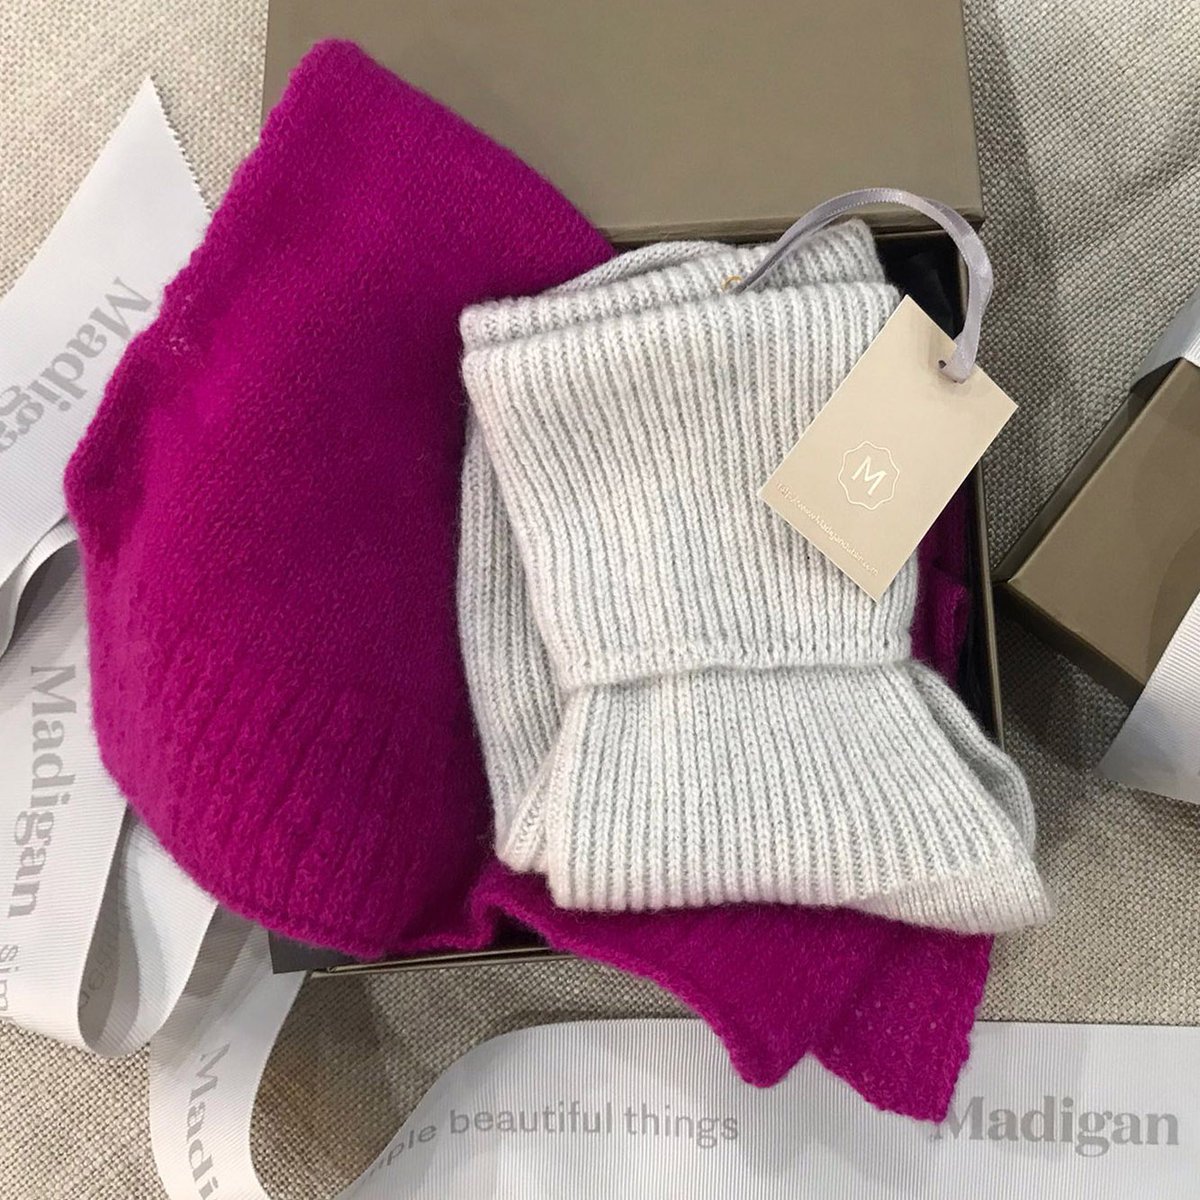 Our Cashmere Socks & Milis Kitten Scarf are two of our most popular gift ideas, but they also make the perfect treat for yourself.

Two pieces that add the perfect touch of luxury to the everyday 🥰

#gifting #giftideas #irishgifts #cashmere